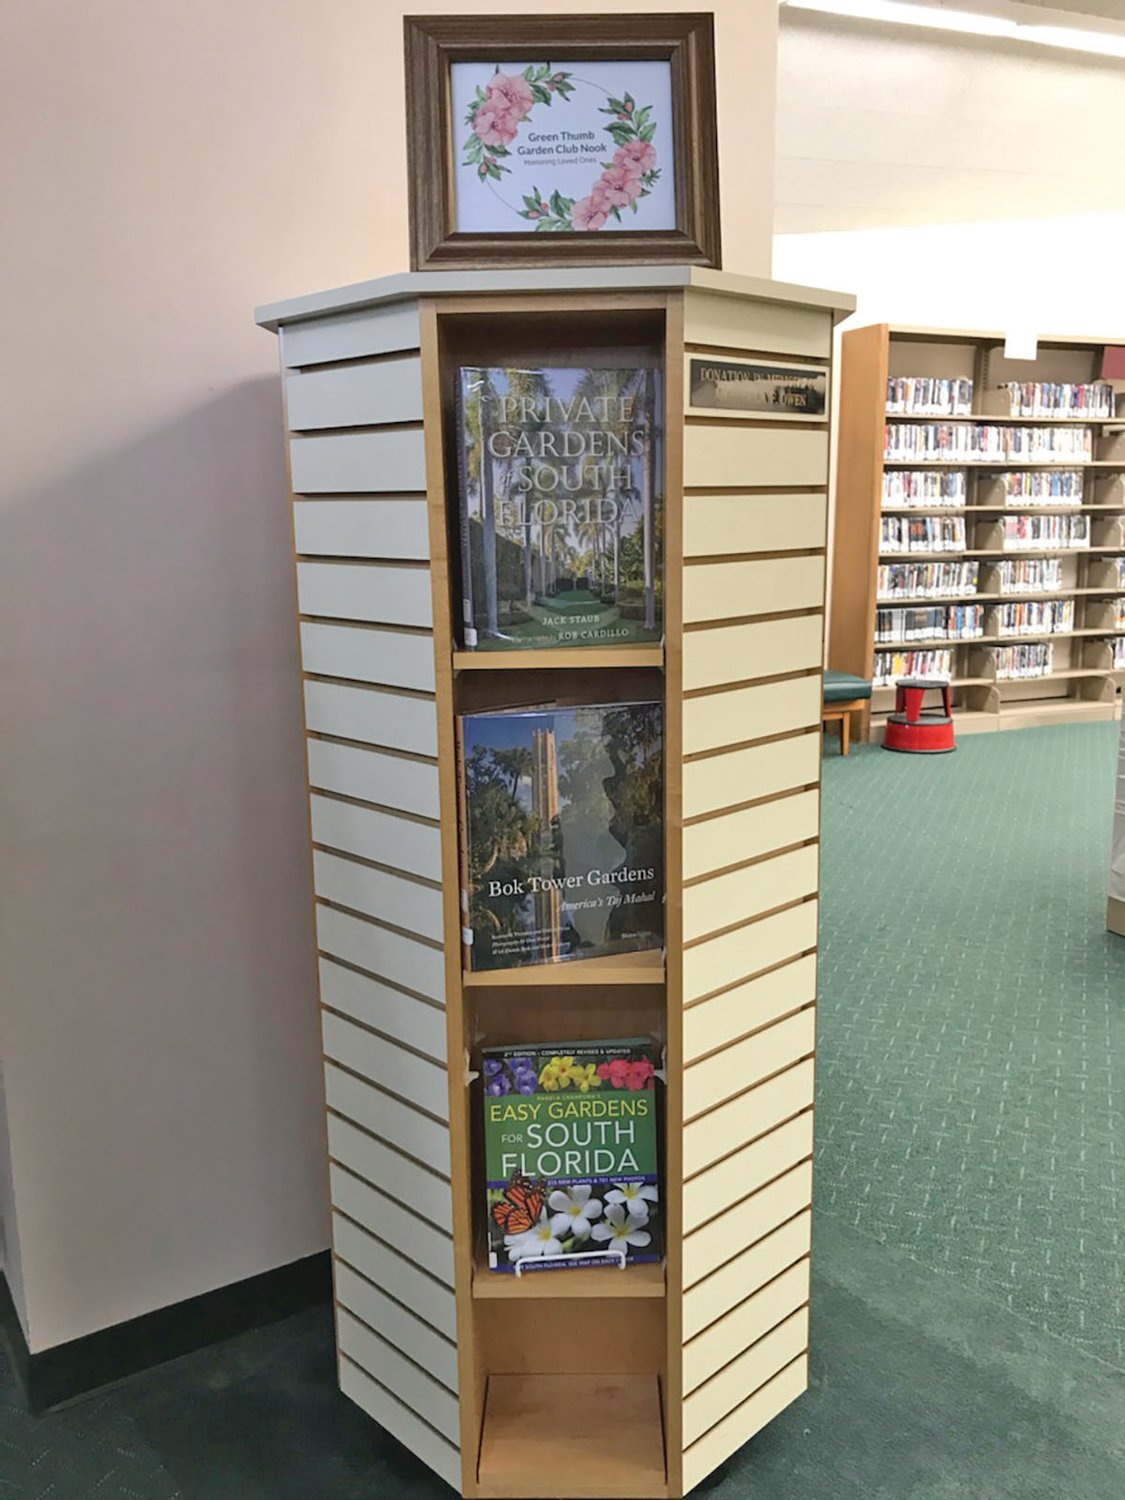 The Book Nook at the Clewiston Public Library features “Private Gardens South Florida,” “Bok Tower Gardens,” and “Easy Gardens for South Florida.”